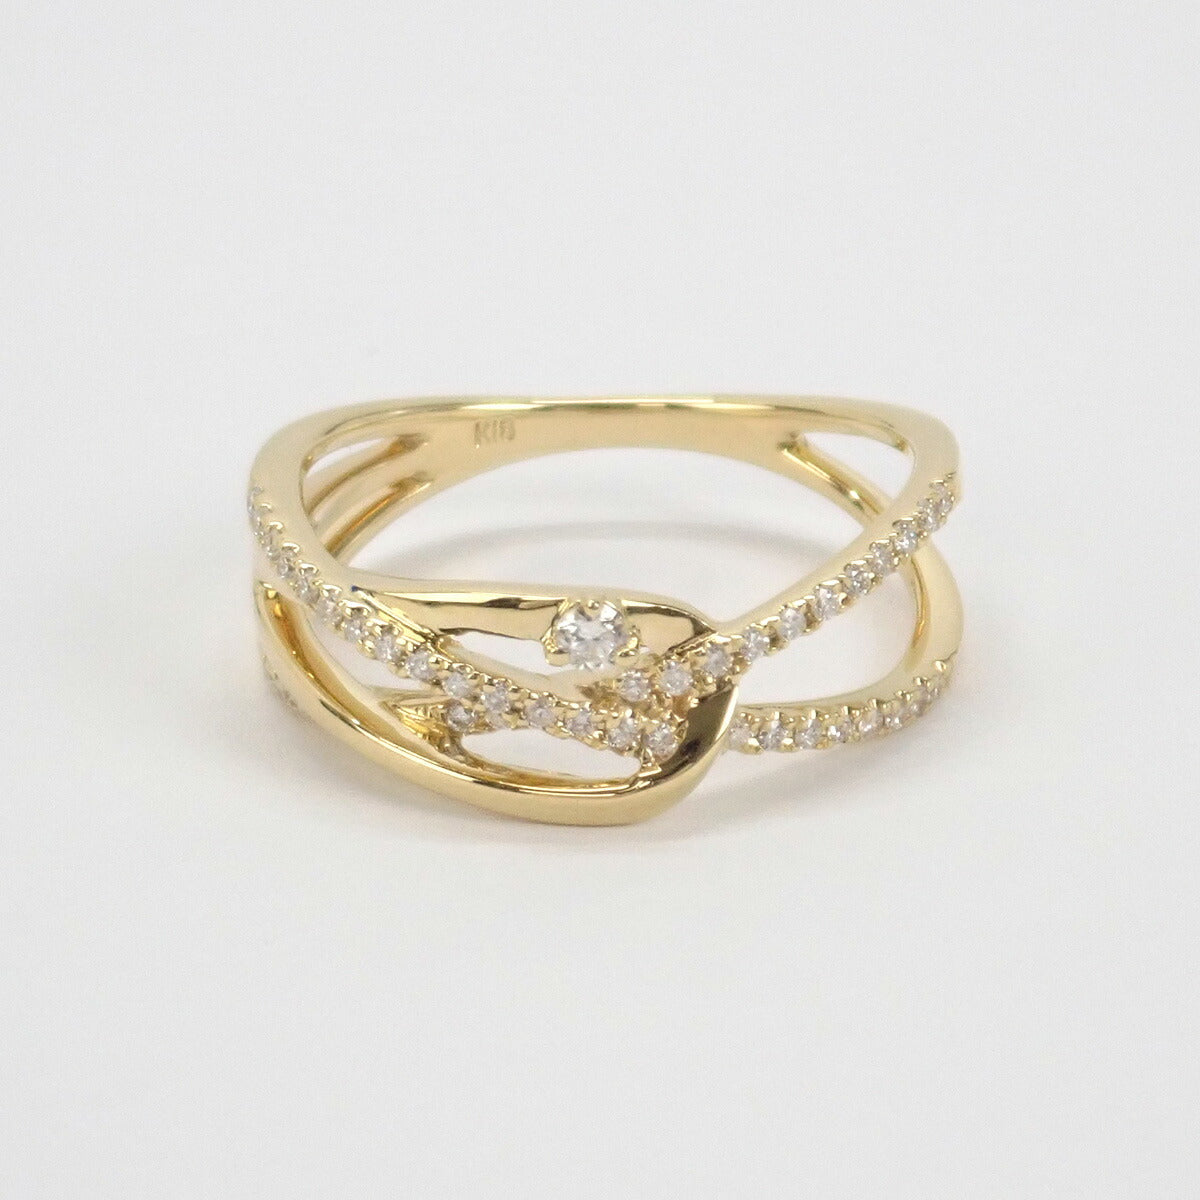 K18YG Diamond Ring, Size 14.5, Yellow Gold Finish, Ladies (Pre-owned)